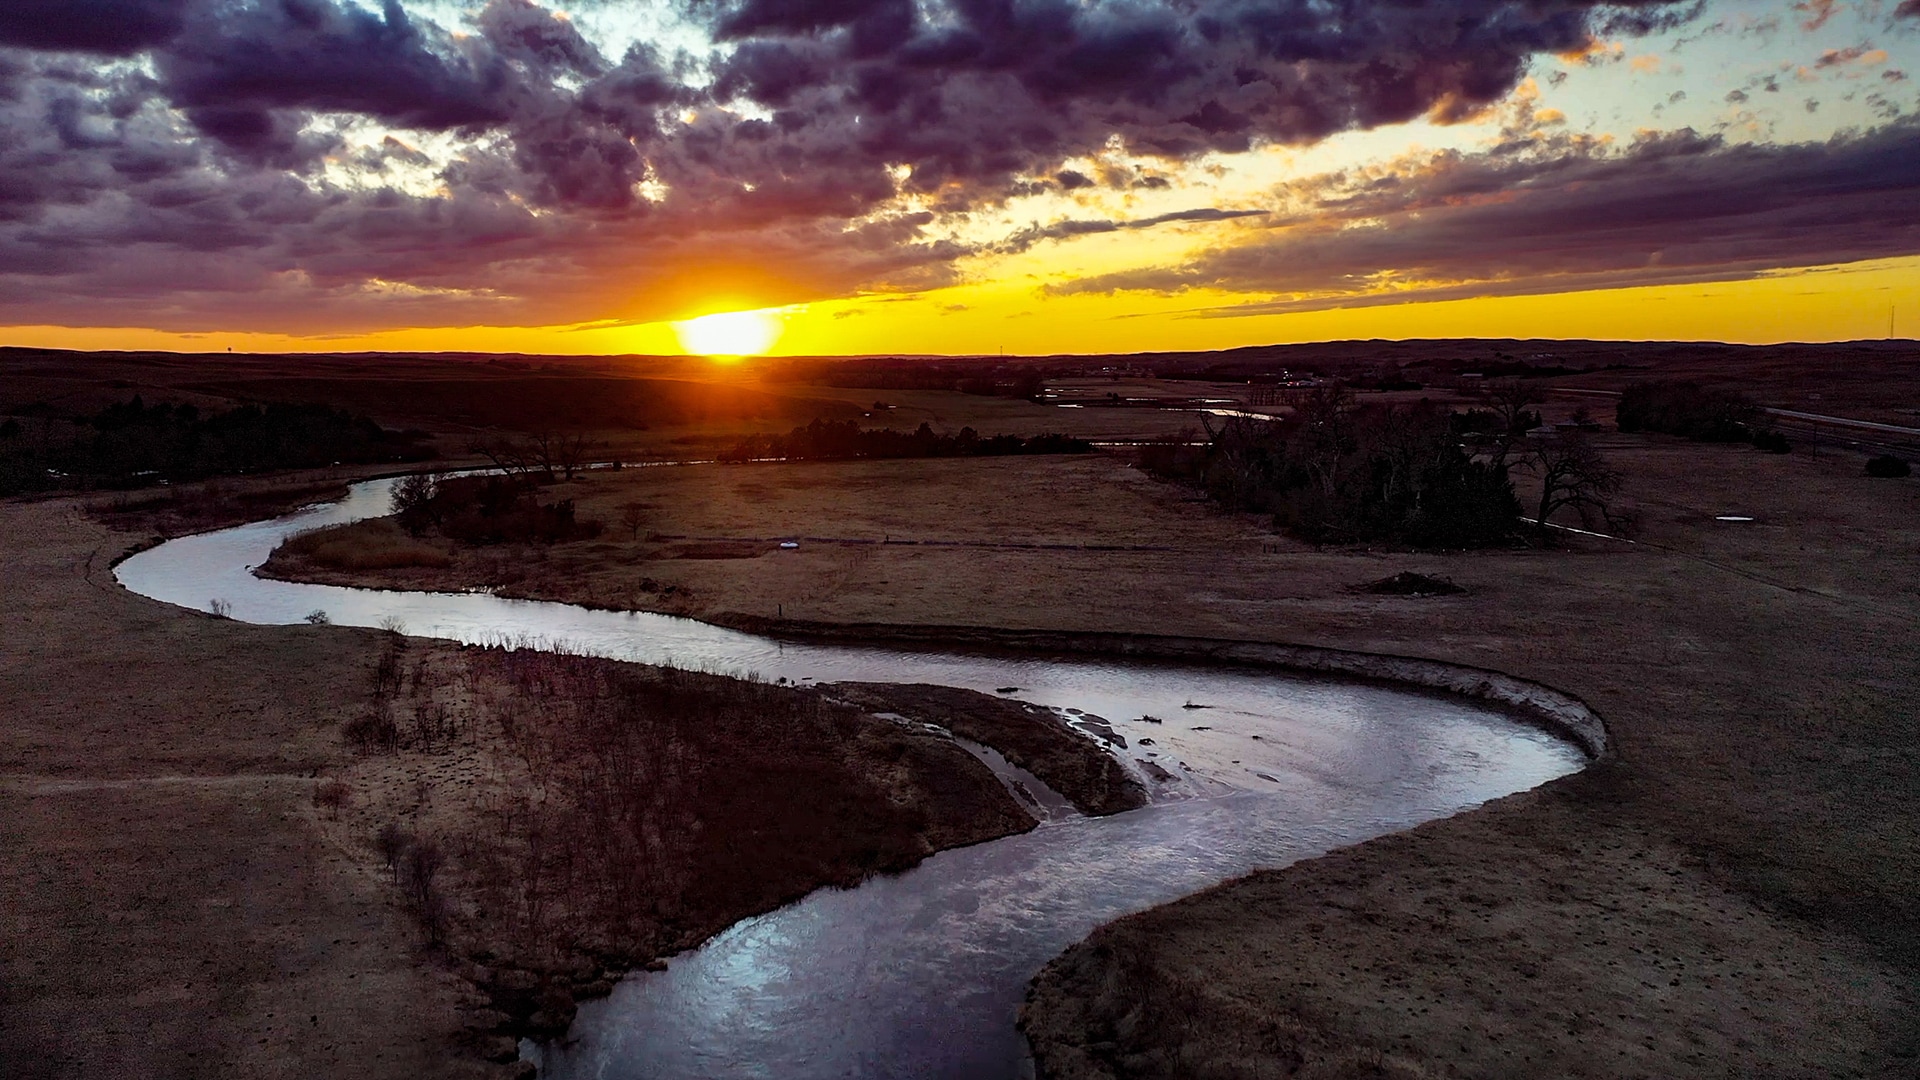  The sun sets on the Middle Loup River near Thedford, Nebraska.